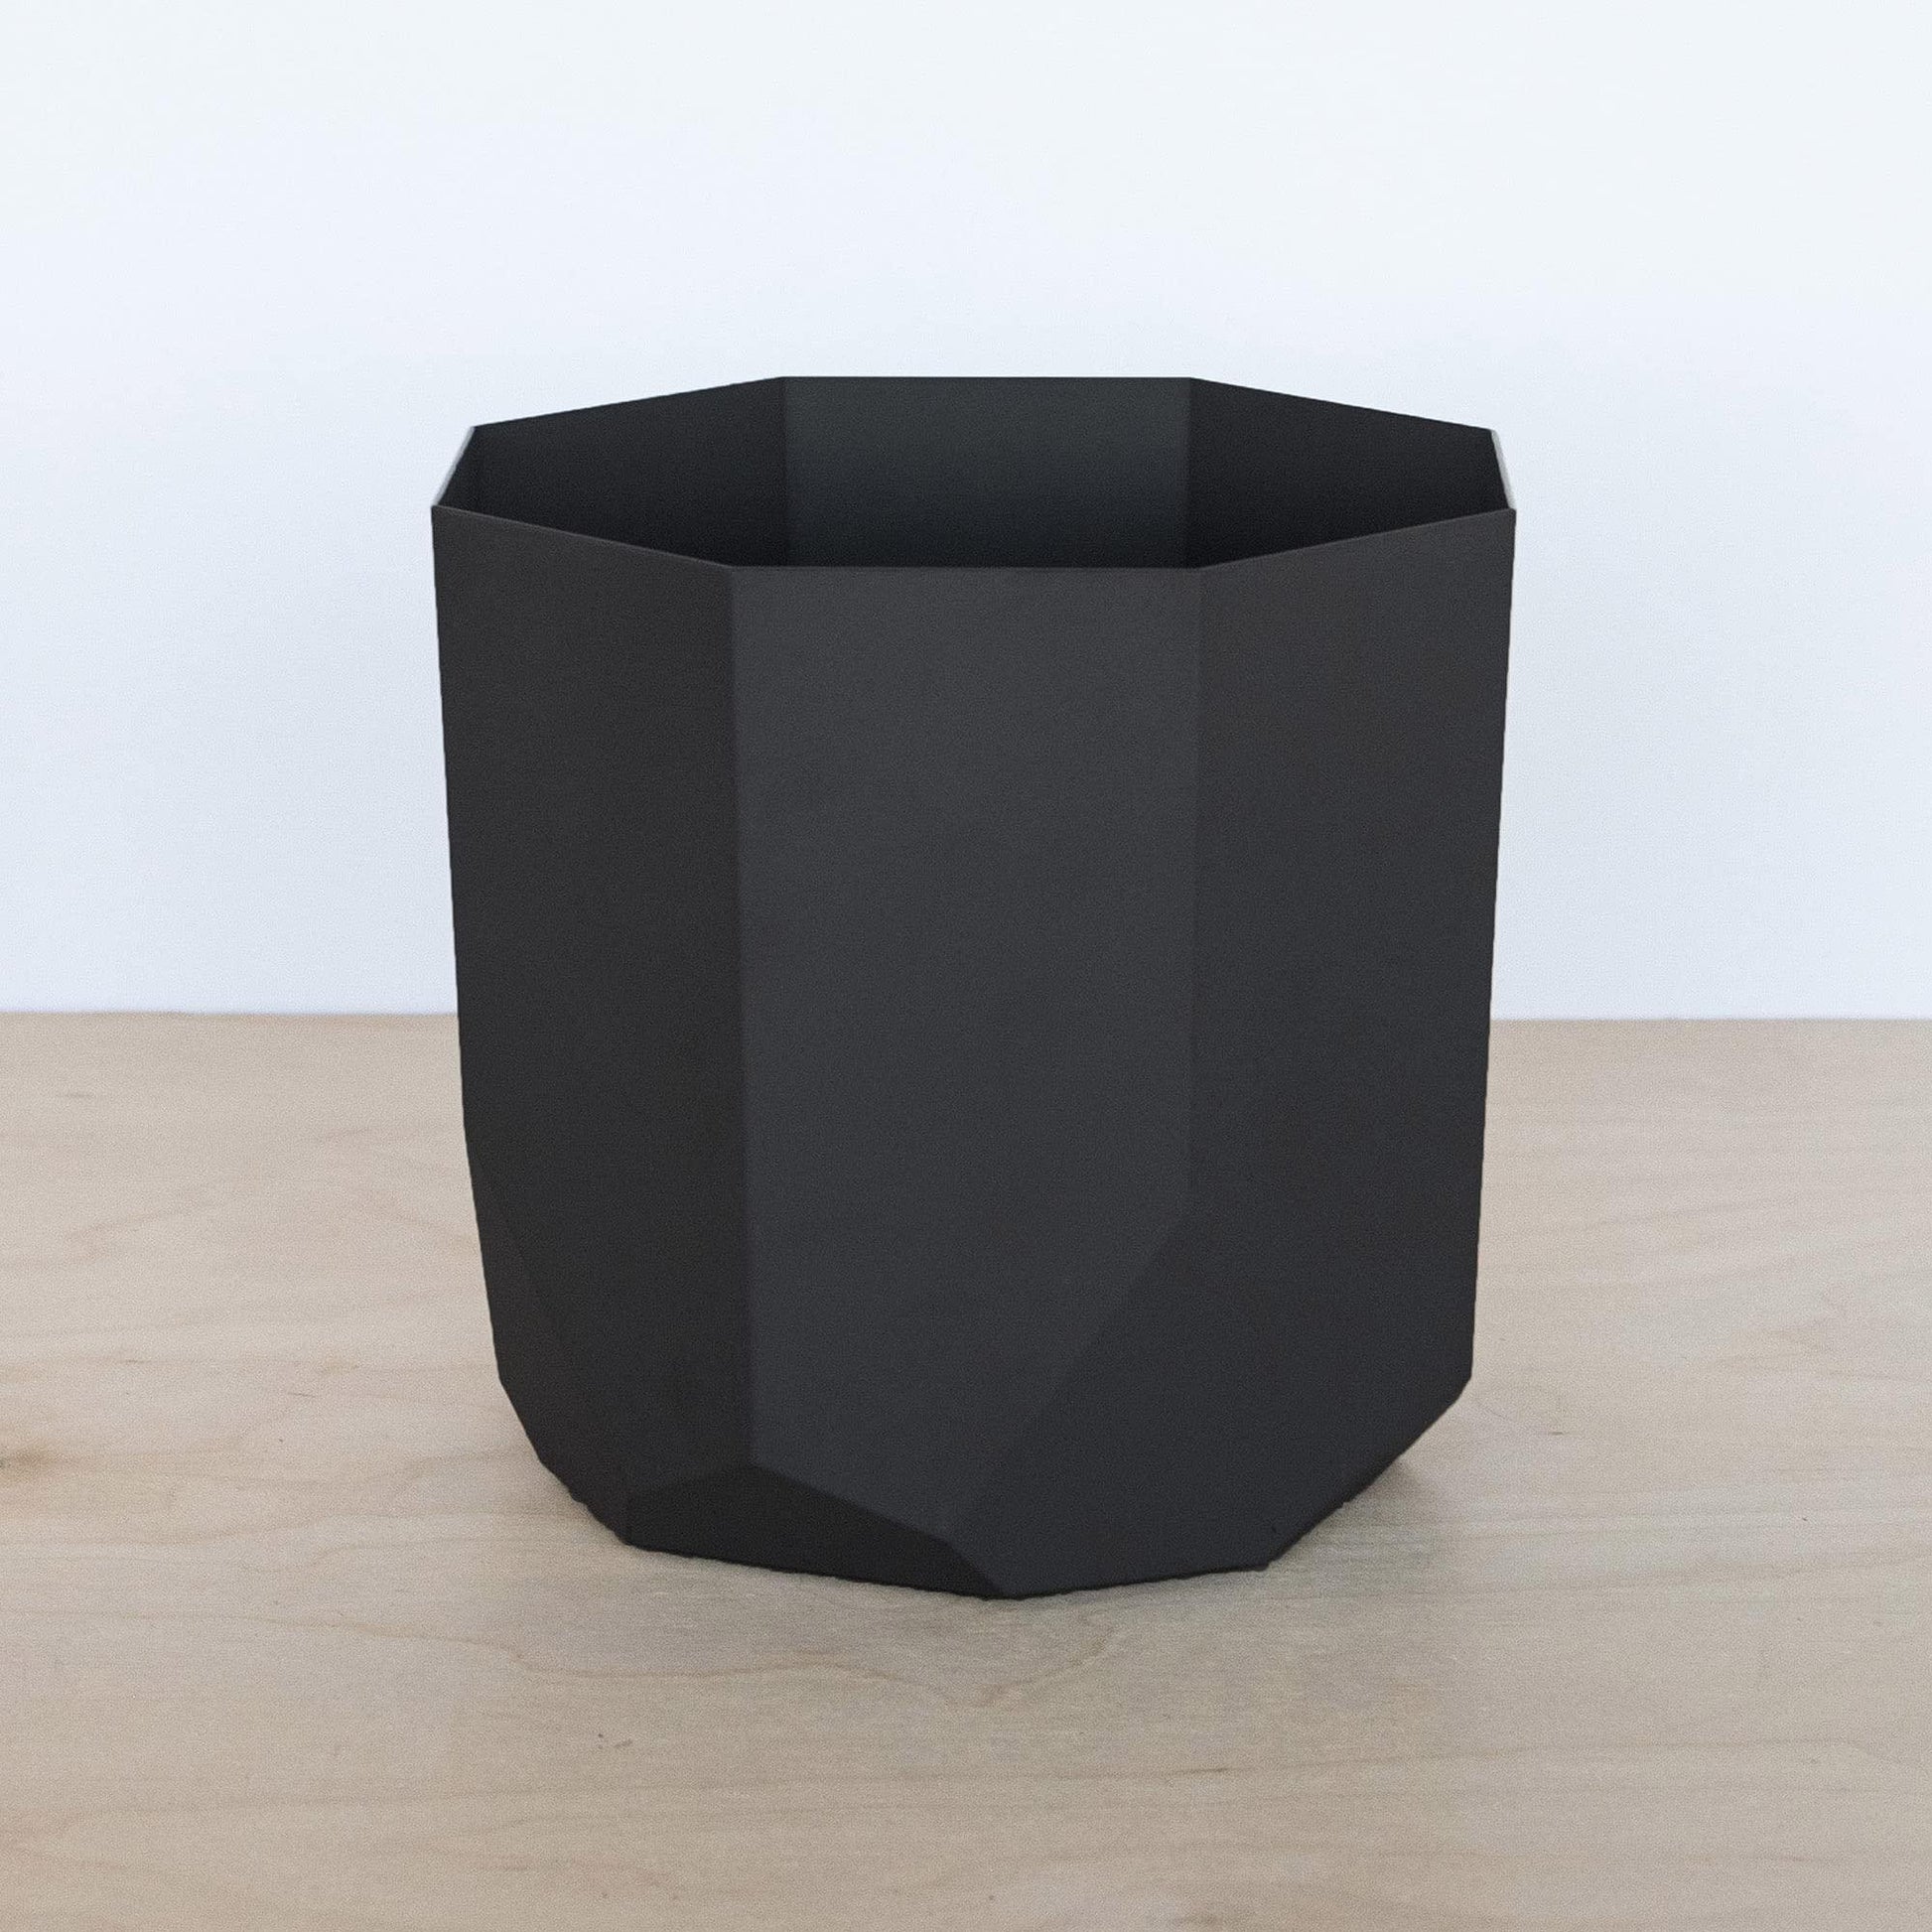 Bloem Tuxton Modern Hexagon Small Planter: 10" - Black - Matte Finish, Durable Resin, Modern Design, Optional Drainage Holes, for Indoor and Outdoor Use, Gardening, 2.7 Gallon Capacity - CookCave